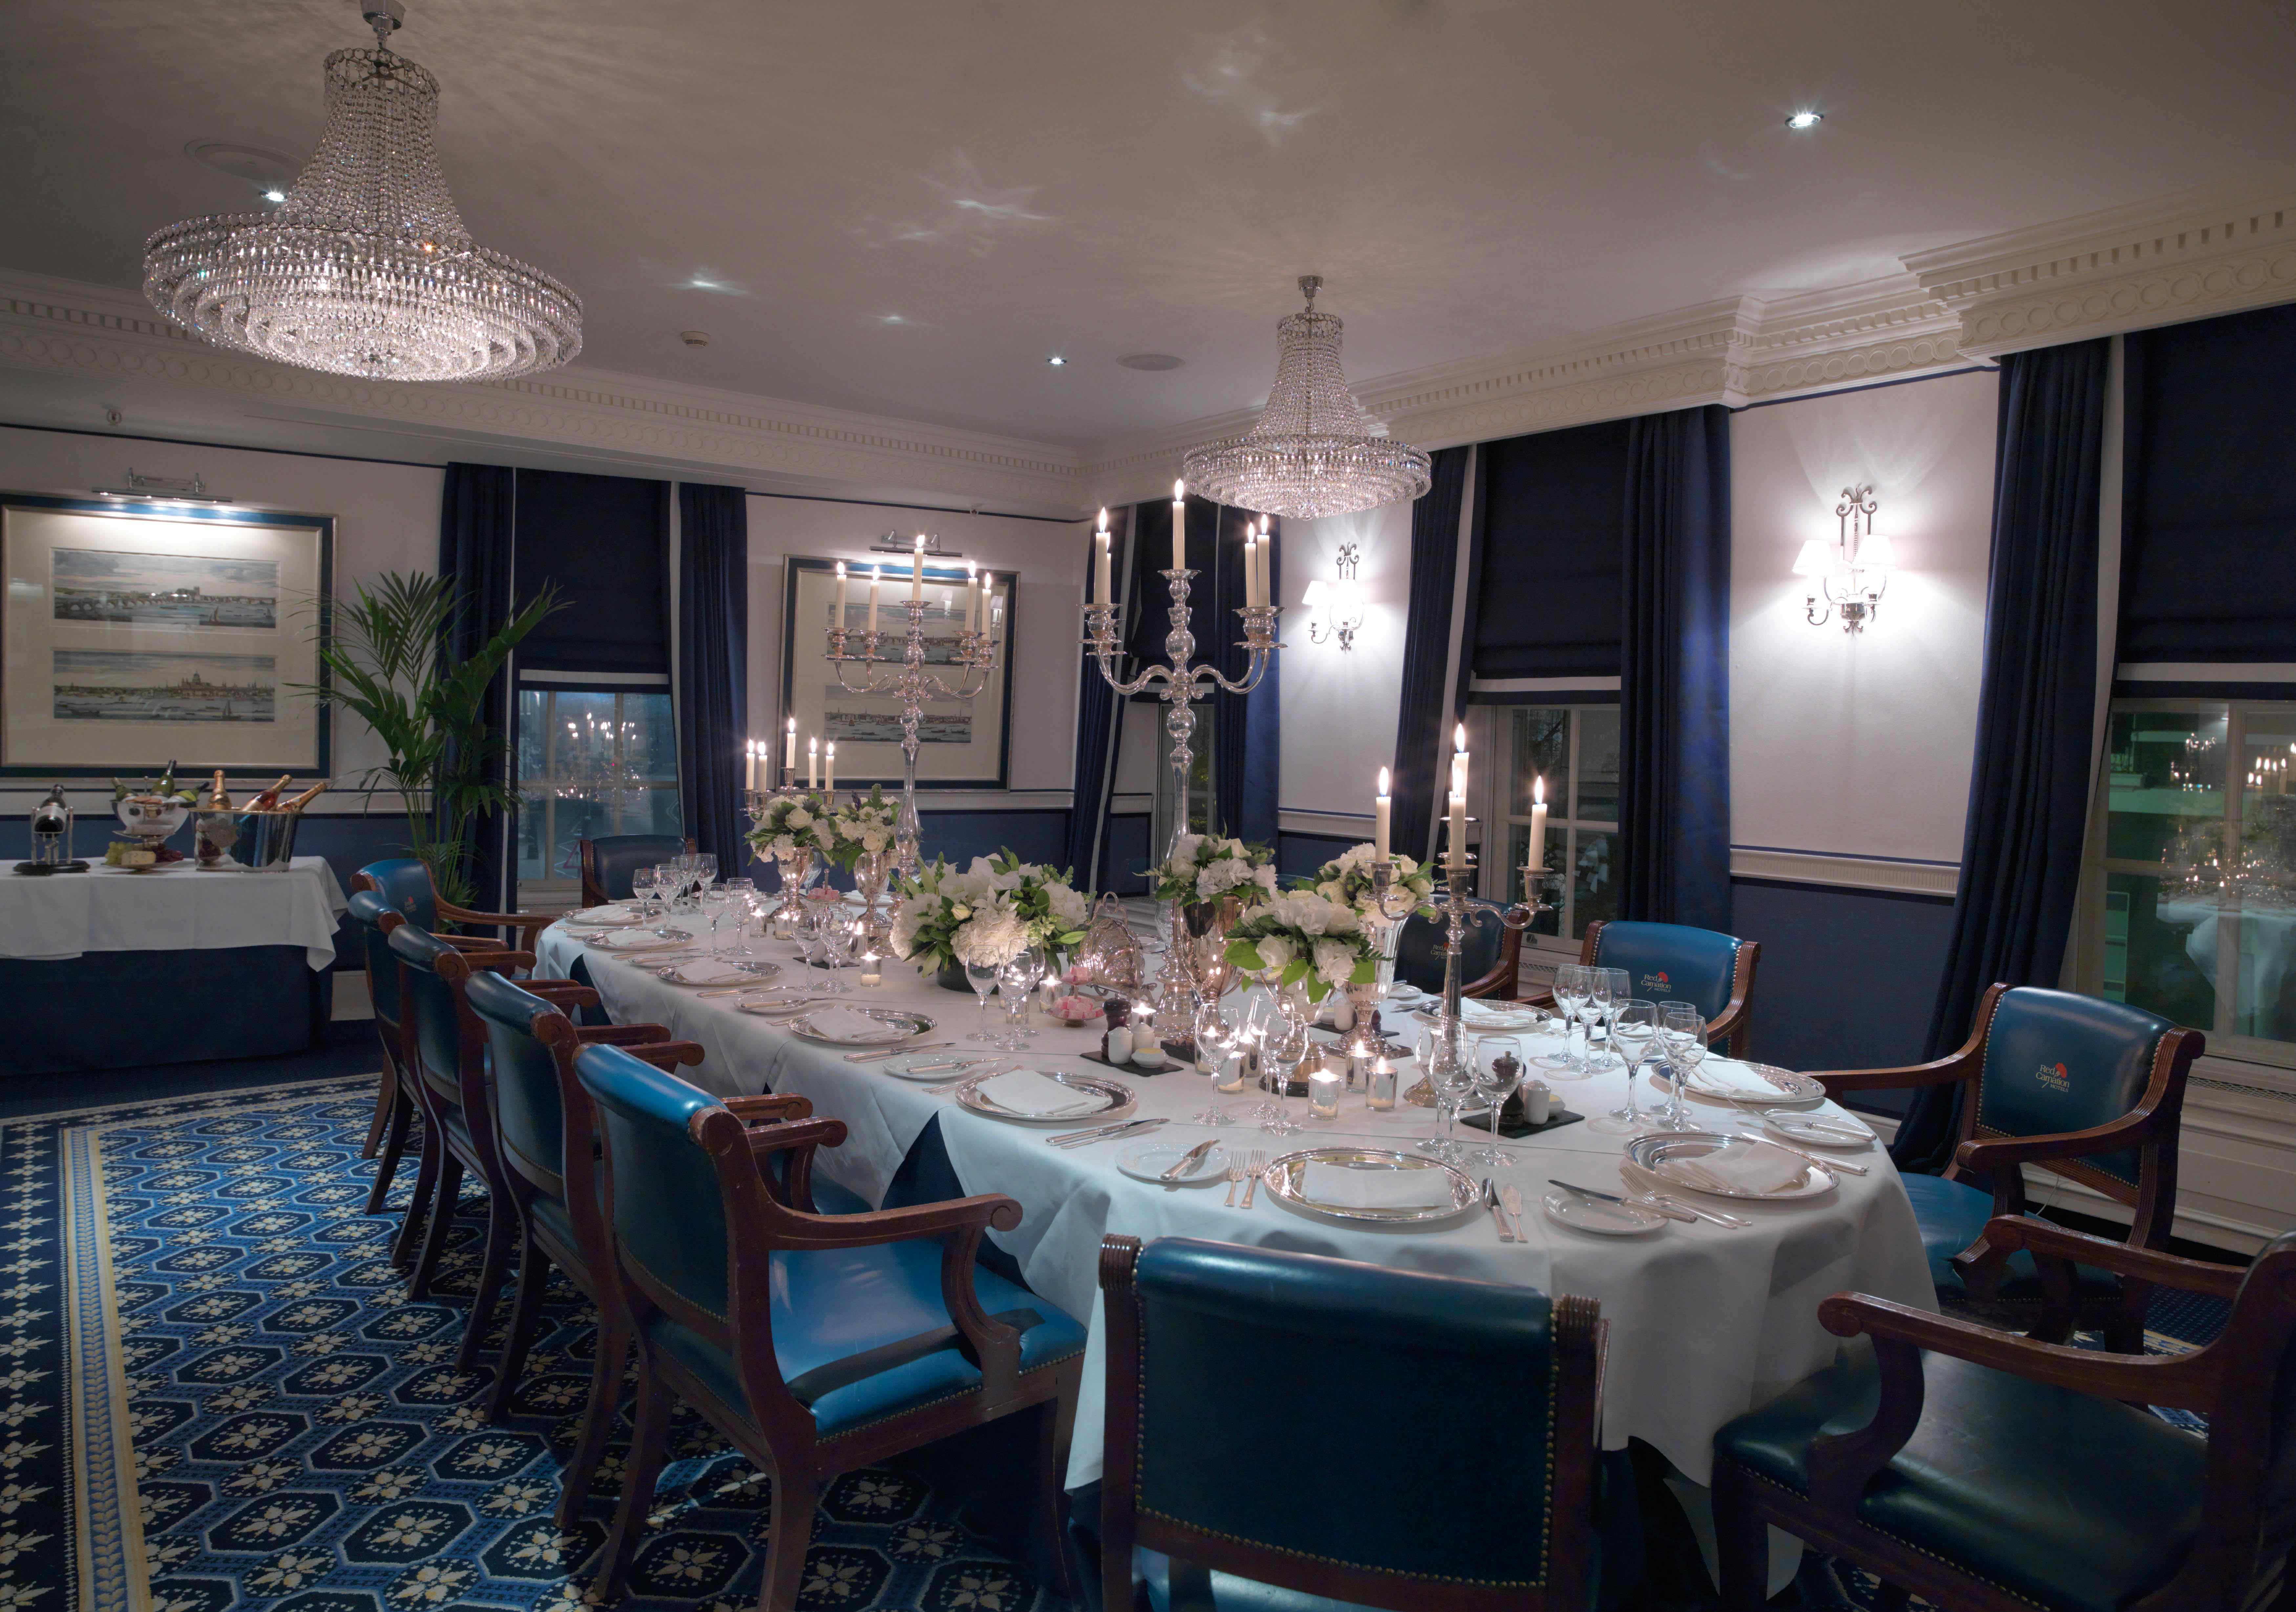 Queen Suite, The Chesterfield Mayfair Hotel